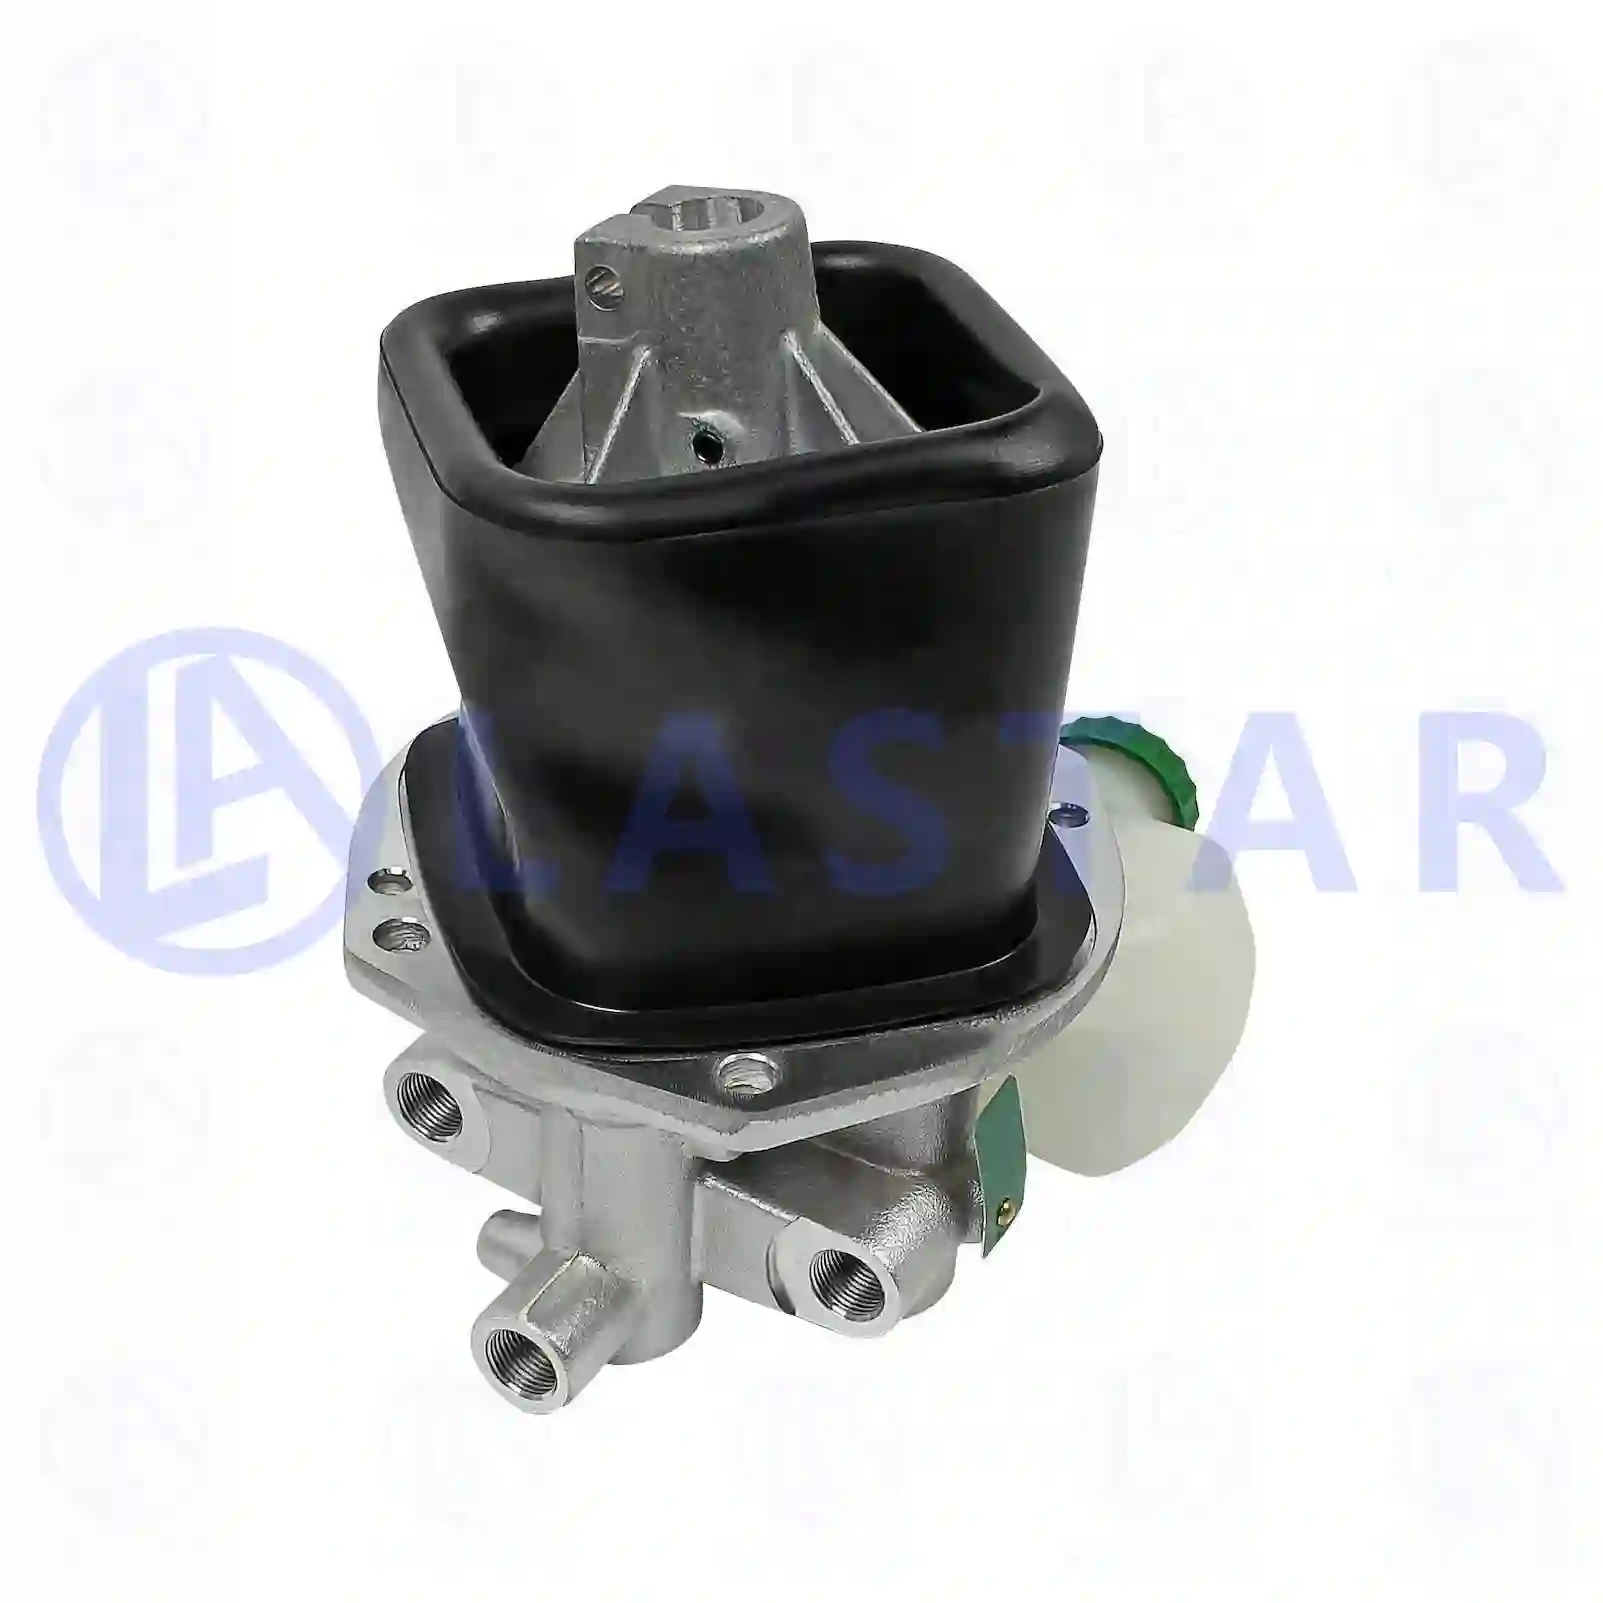 Switching device, gear shift lever, 77732797, 0002606098, ZG21353-0008 ||  77732797 Lastar Spare Part | Truck Spare Parts, Auotomotive Spare Parts Switching device, gear shift lever, 77732797, 0002606098, ZG21353-0008 ||  77732797 Lastar Spare Part | Truck Spare Parts, Auotomotive Spare Parts